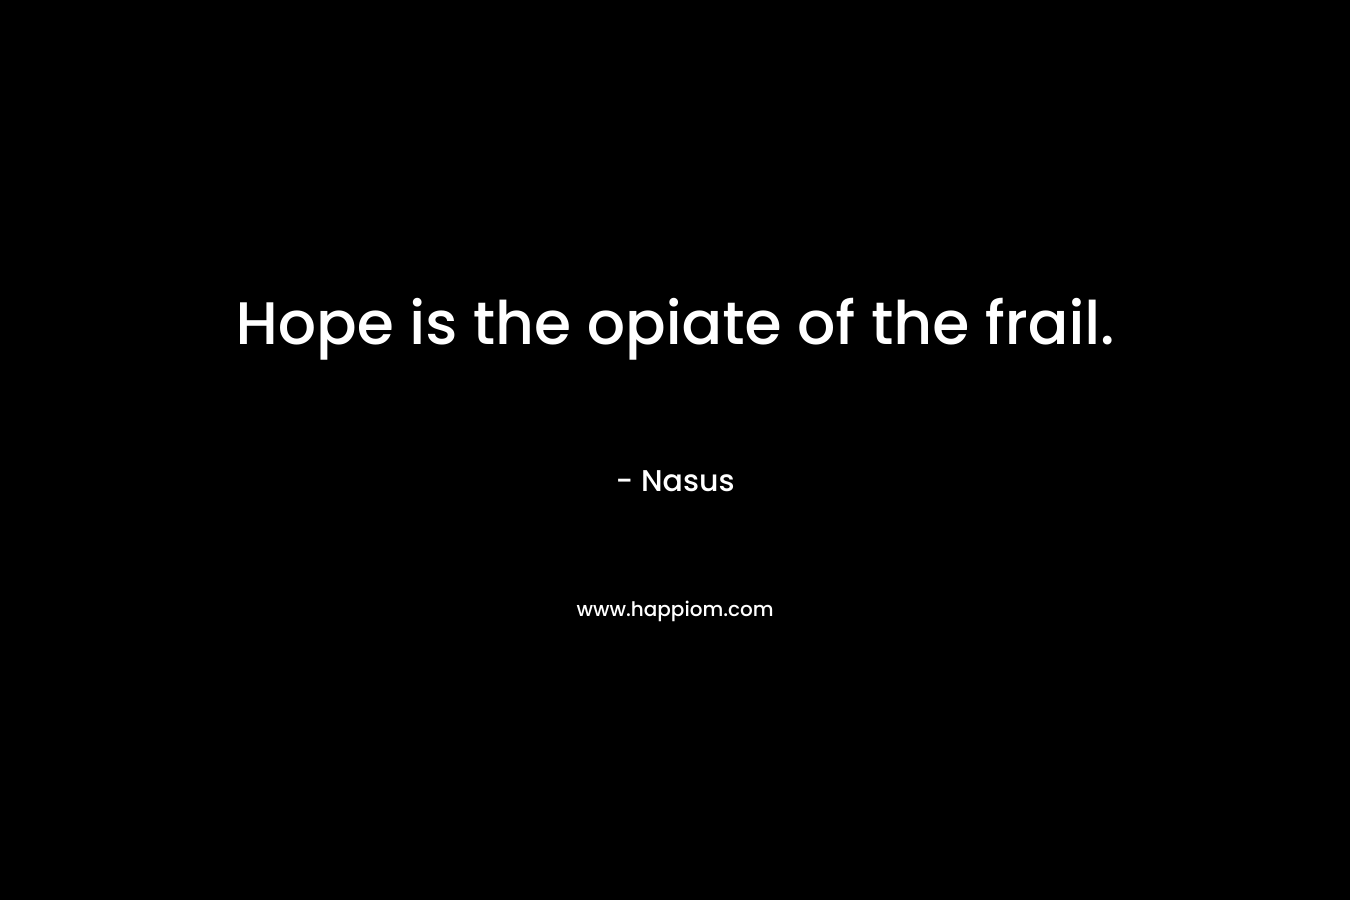 Hope is the opiate of the frail. – Nasus